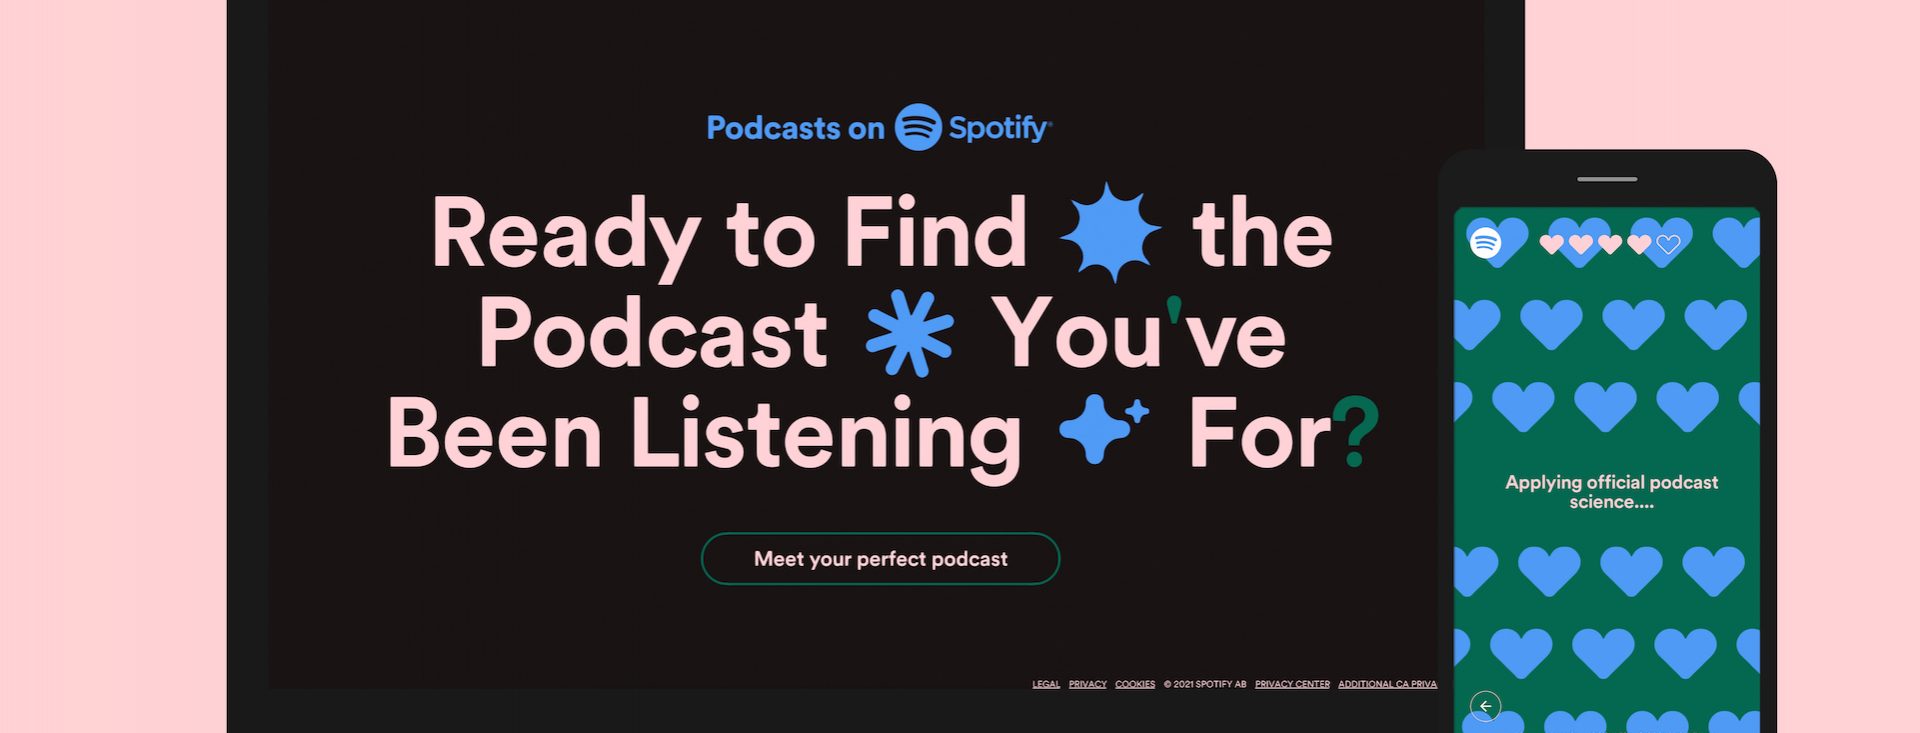 Find your new perfect podcast with this podcast recommendation quiz from Spotify